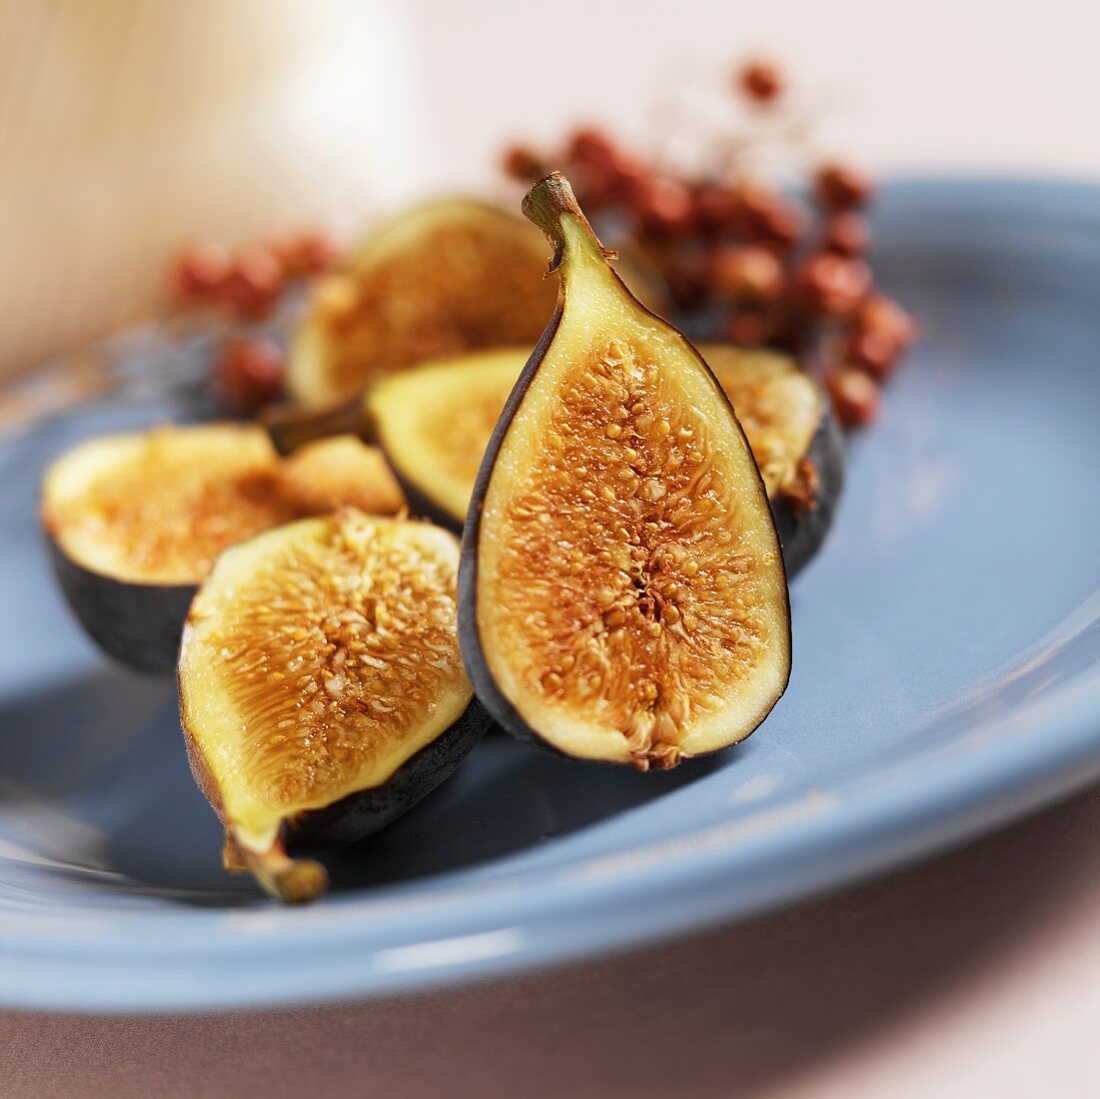 Sliced Figs on a Blue Plate